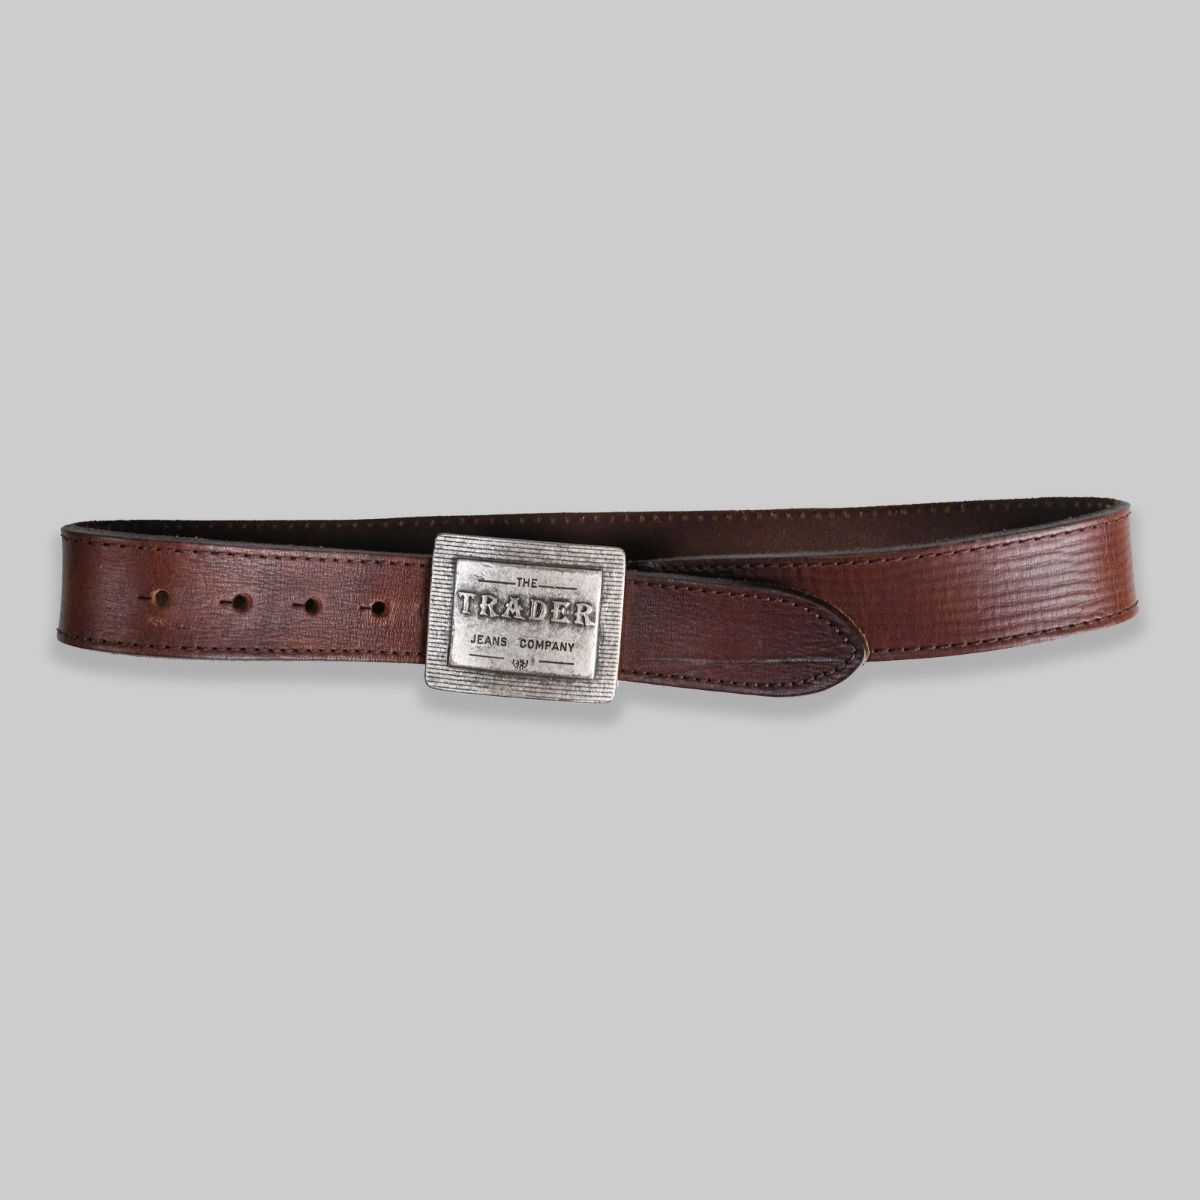 The Trader Jeans Company Belt